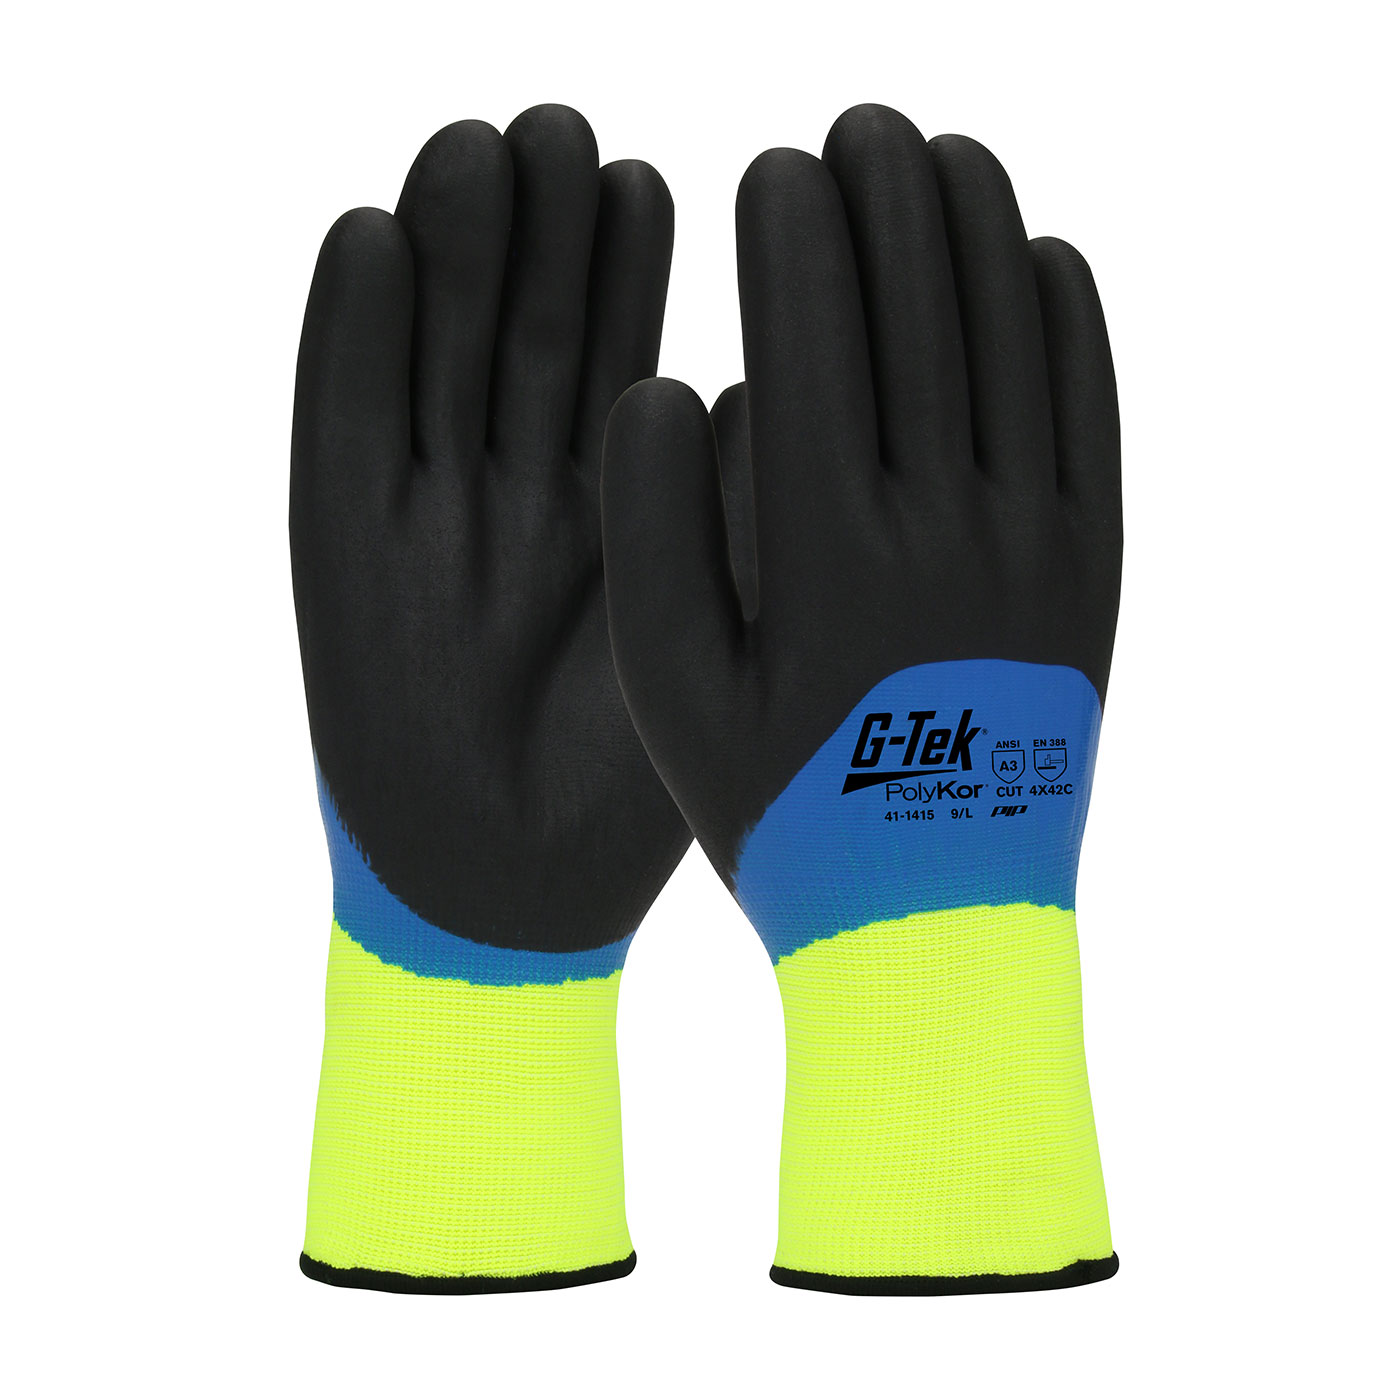 #41-1415 PIP® G-Tek® Hi-Vis Seamless Knit PolyKor Glove with Acrylic Liner and Double Dipped Nitrile Coated Foam Grip on Full Hand 